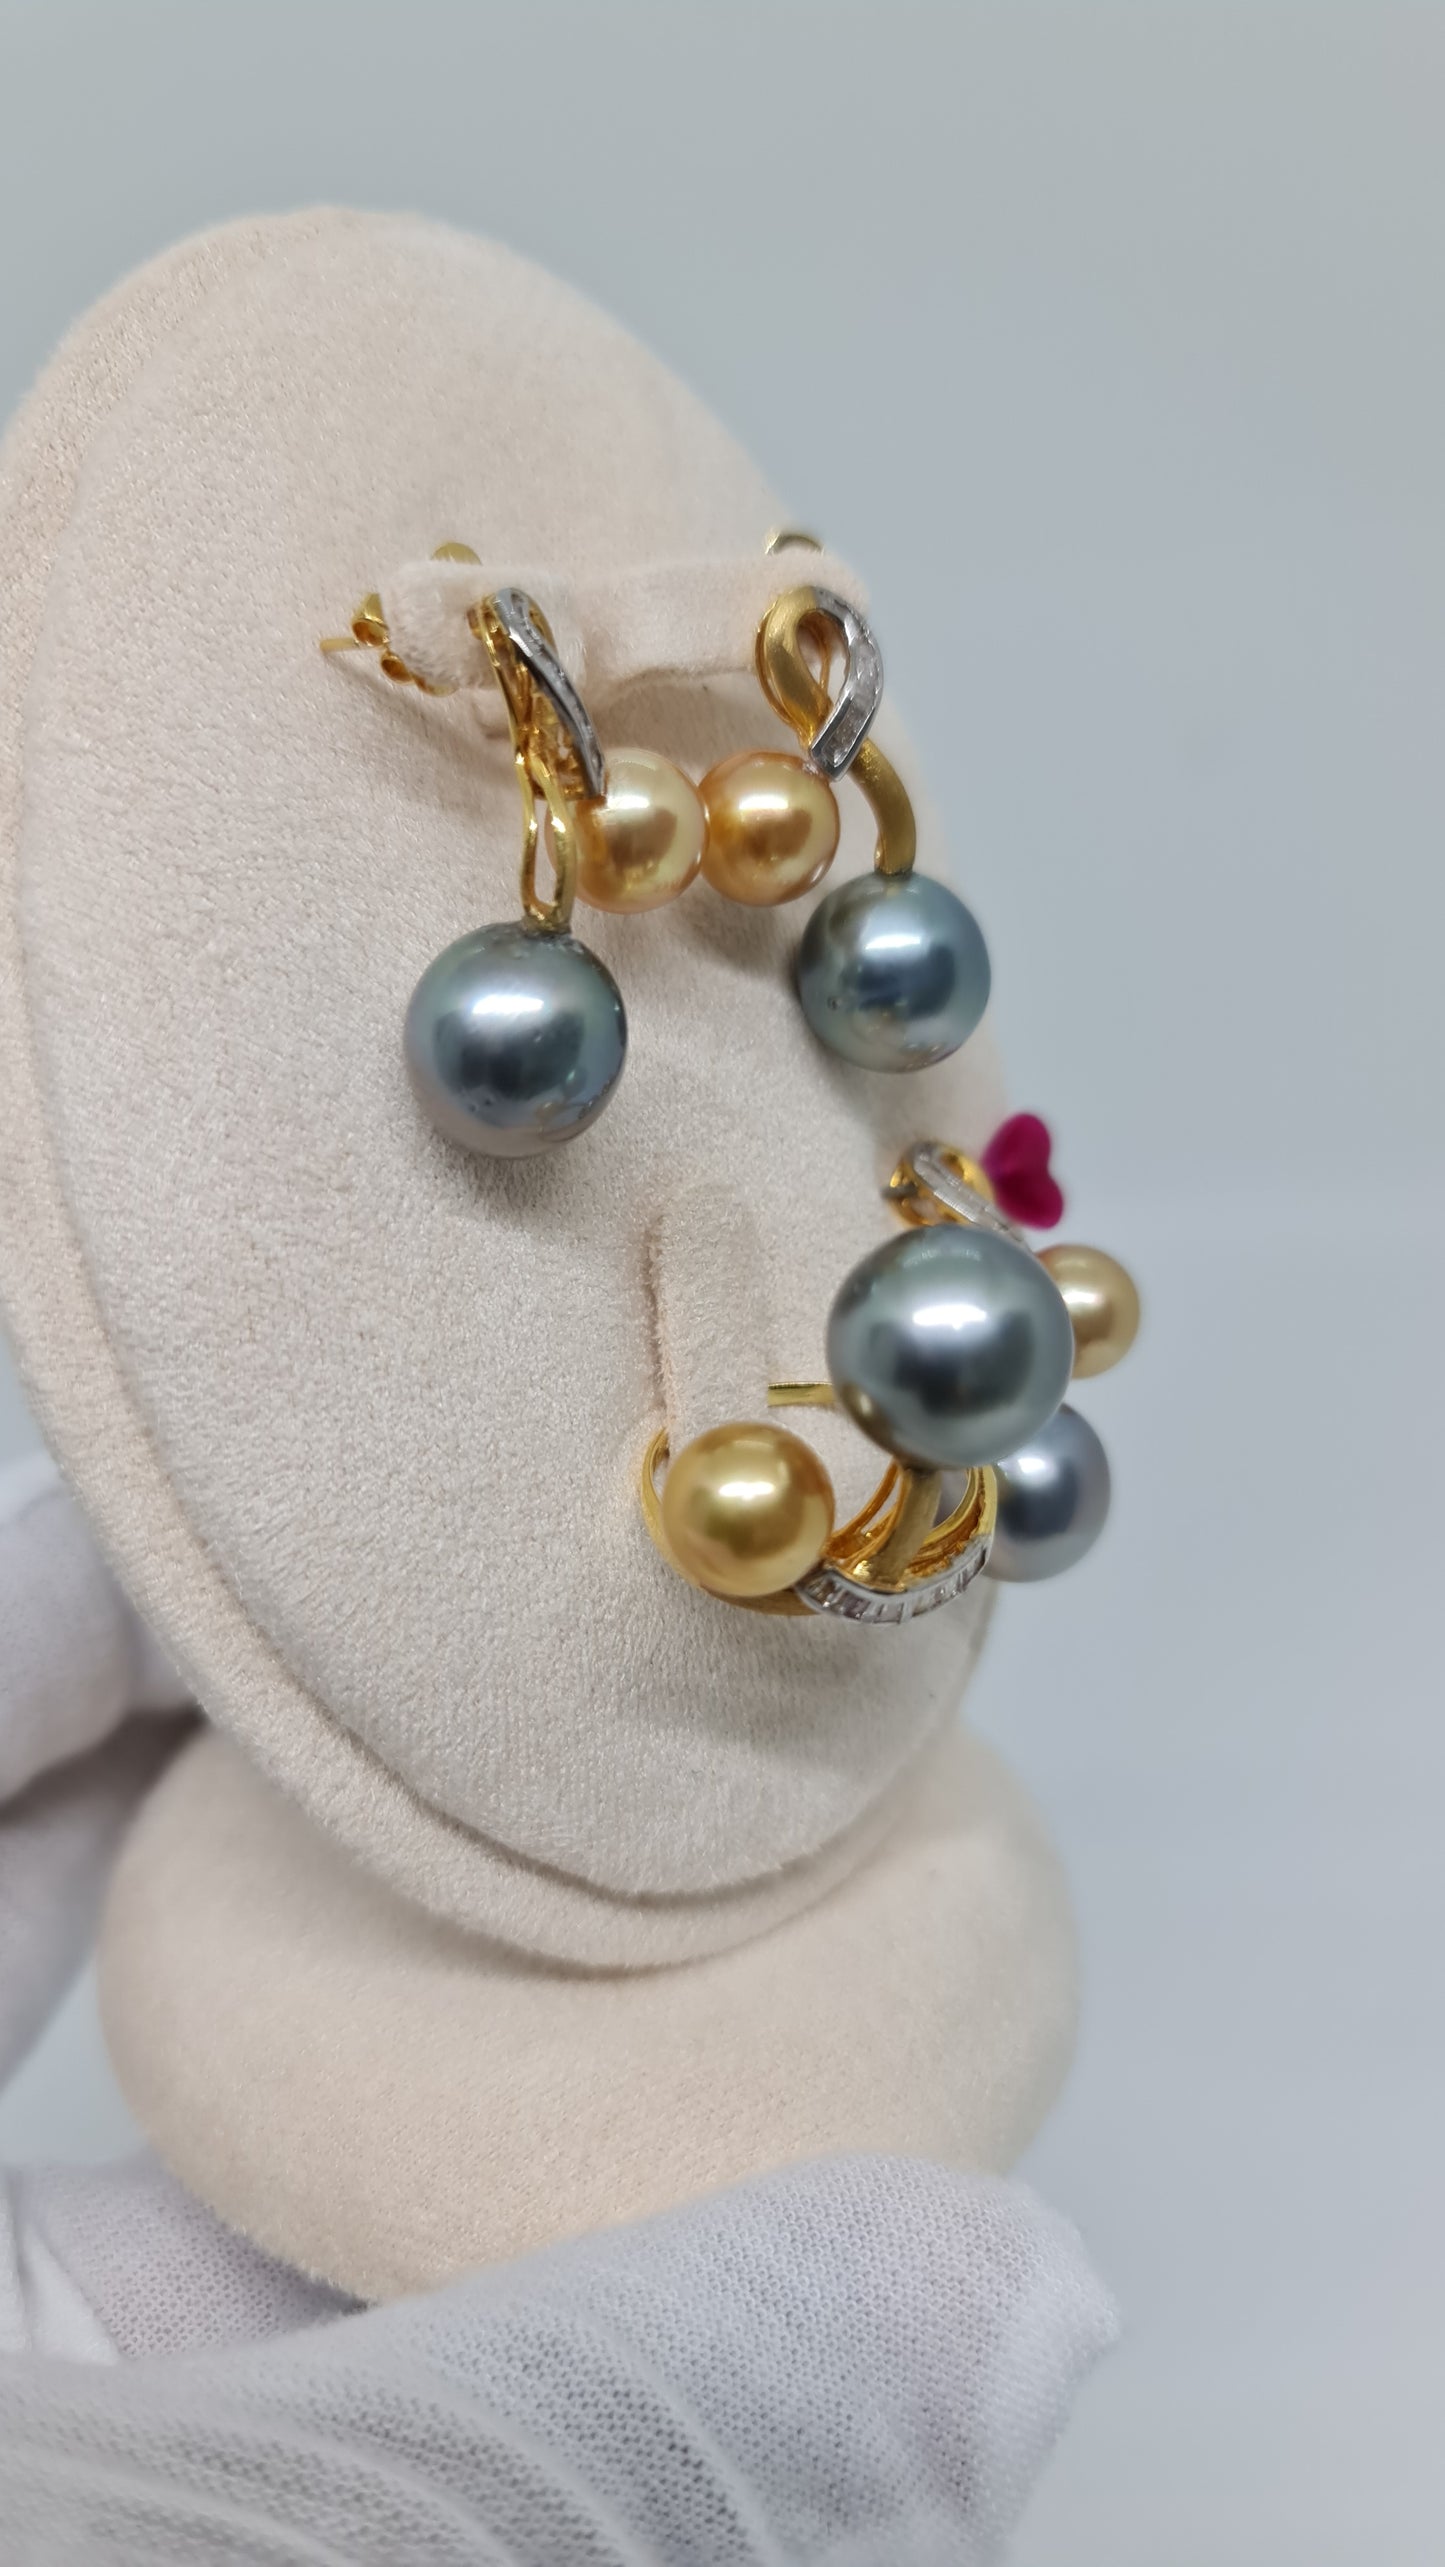 9mm - 12.6mm Deep Golden & Bluish Gray South Sea Pearls Set 3in1 14K Gold with Diamond